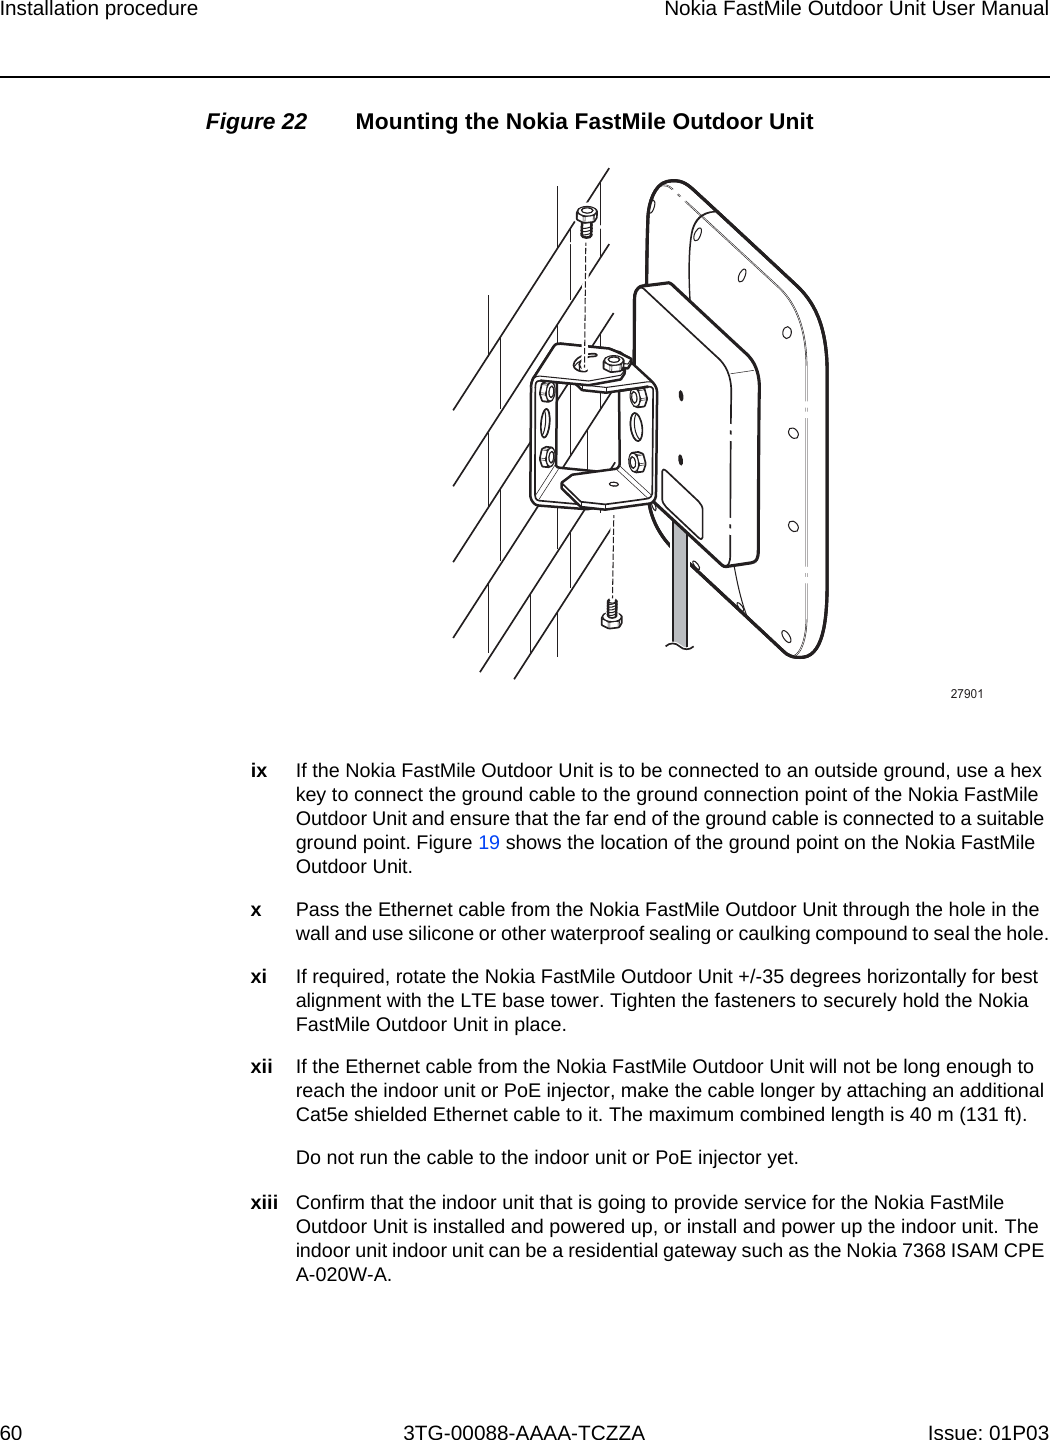 Page 55 of Nokia Bell 34003800FM20 FastMile Compact User Manual Nokia FastMile Outdoor Unit